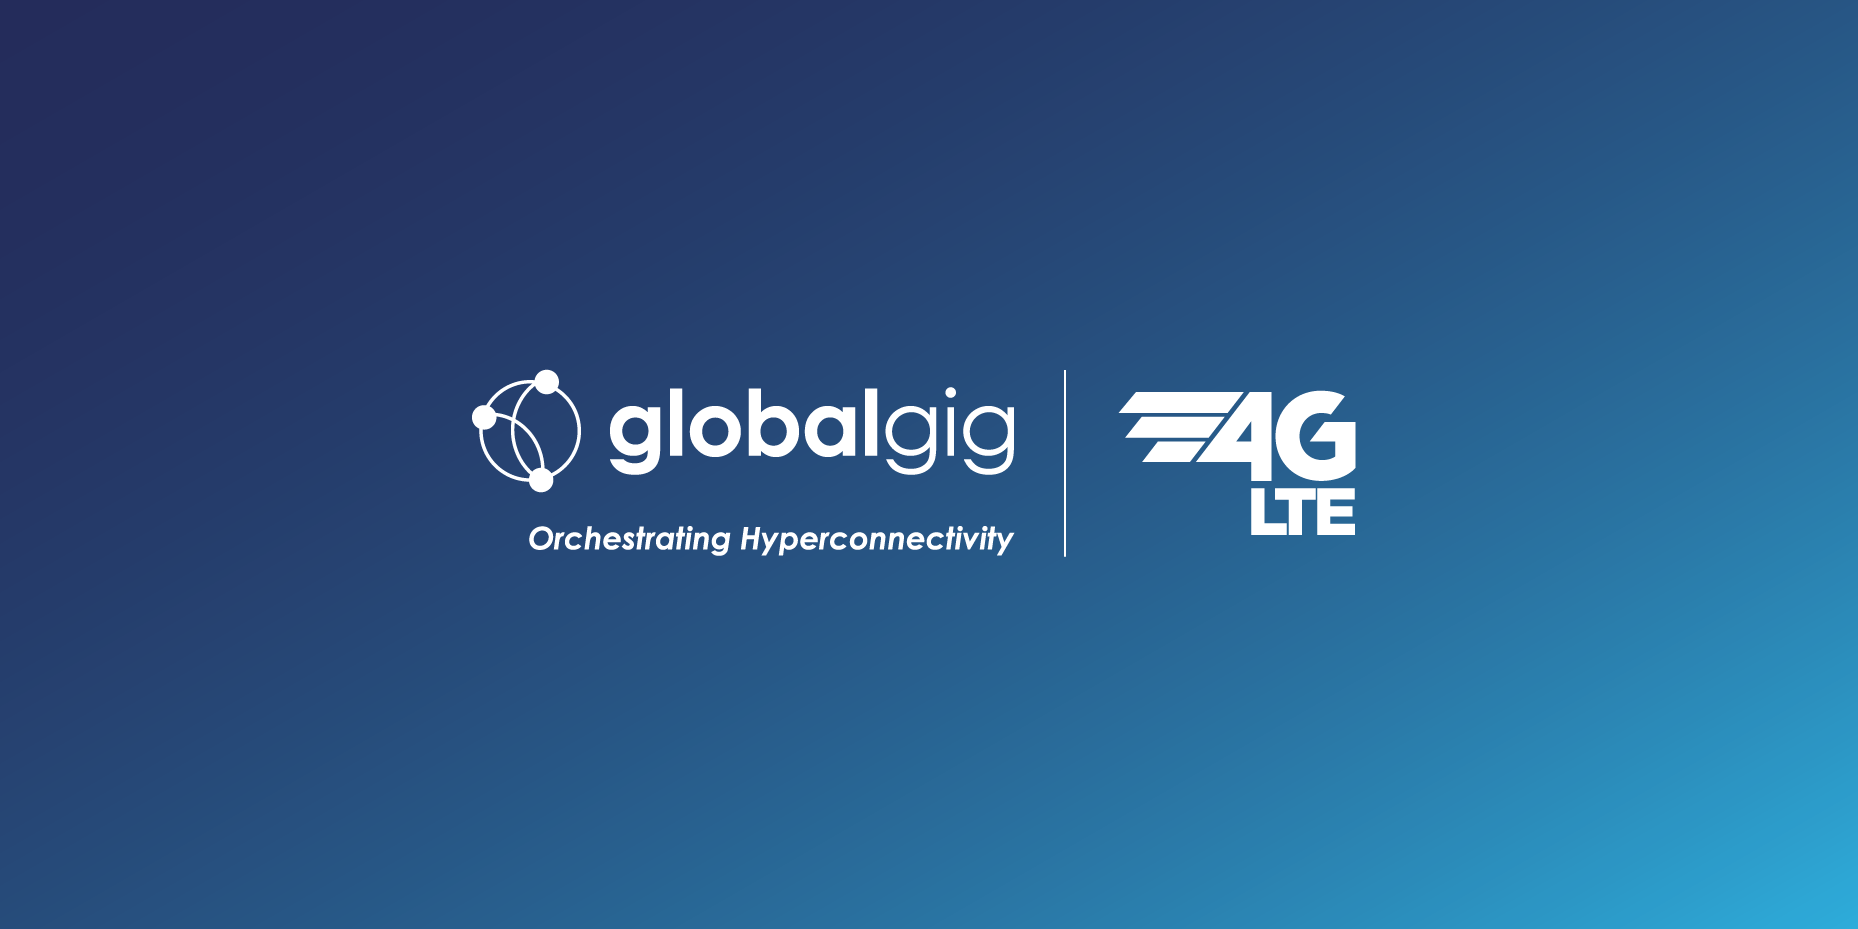 Globalgig: ‘Every Partner Should Have This in Their Portfolio’